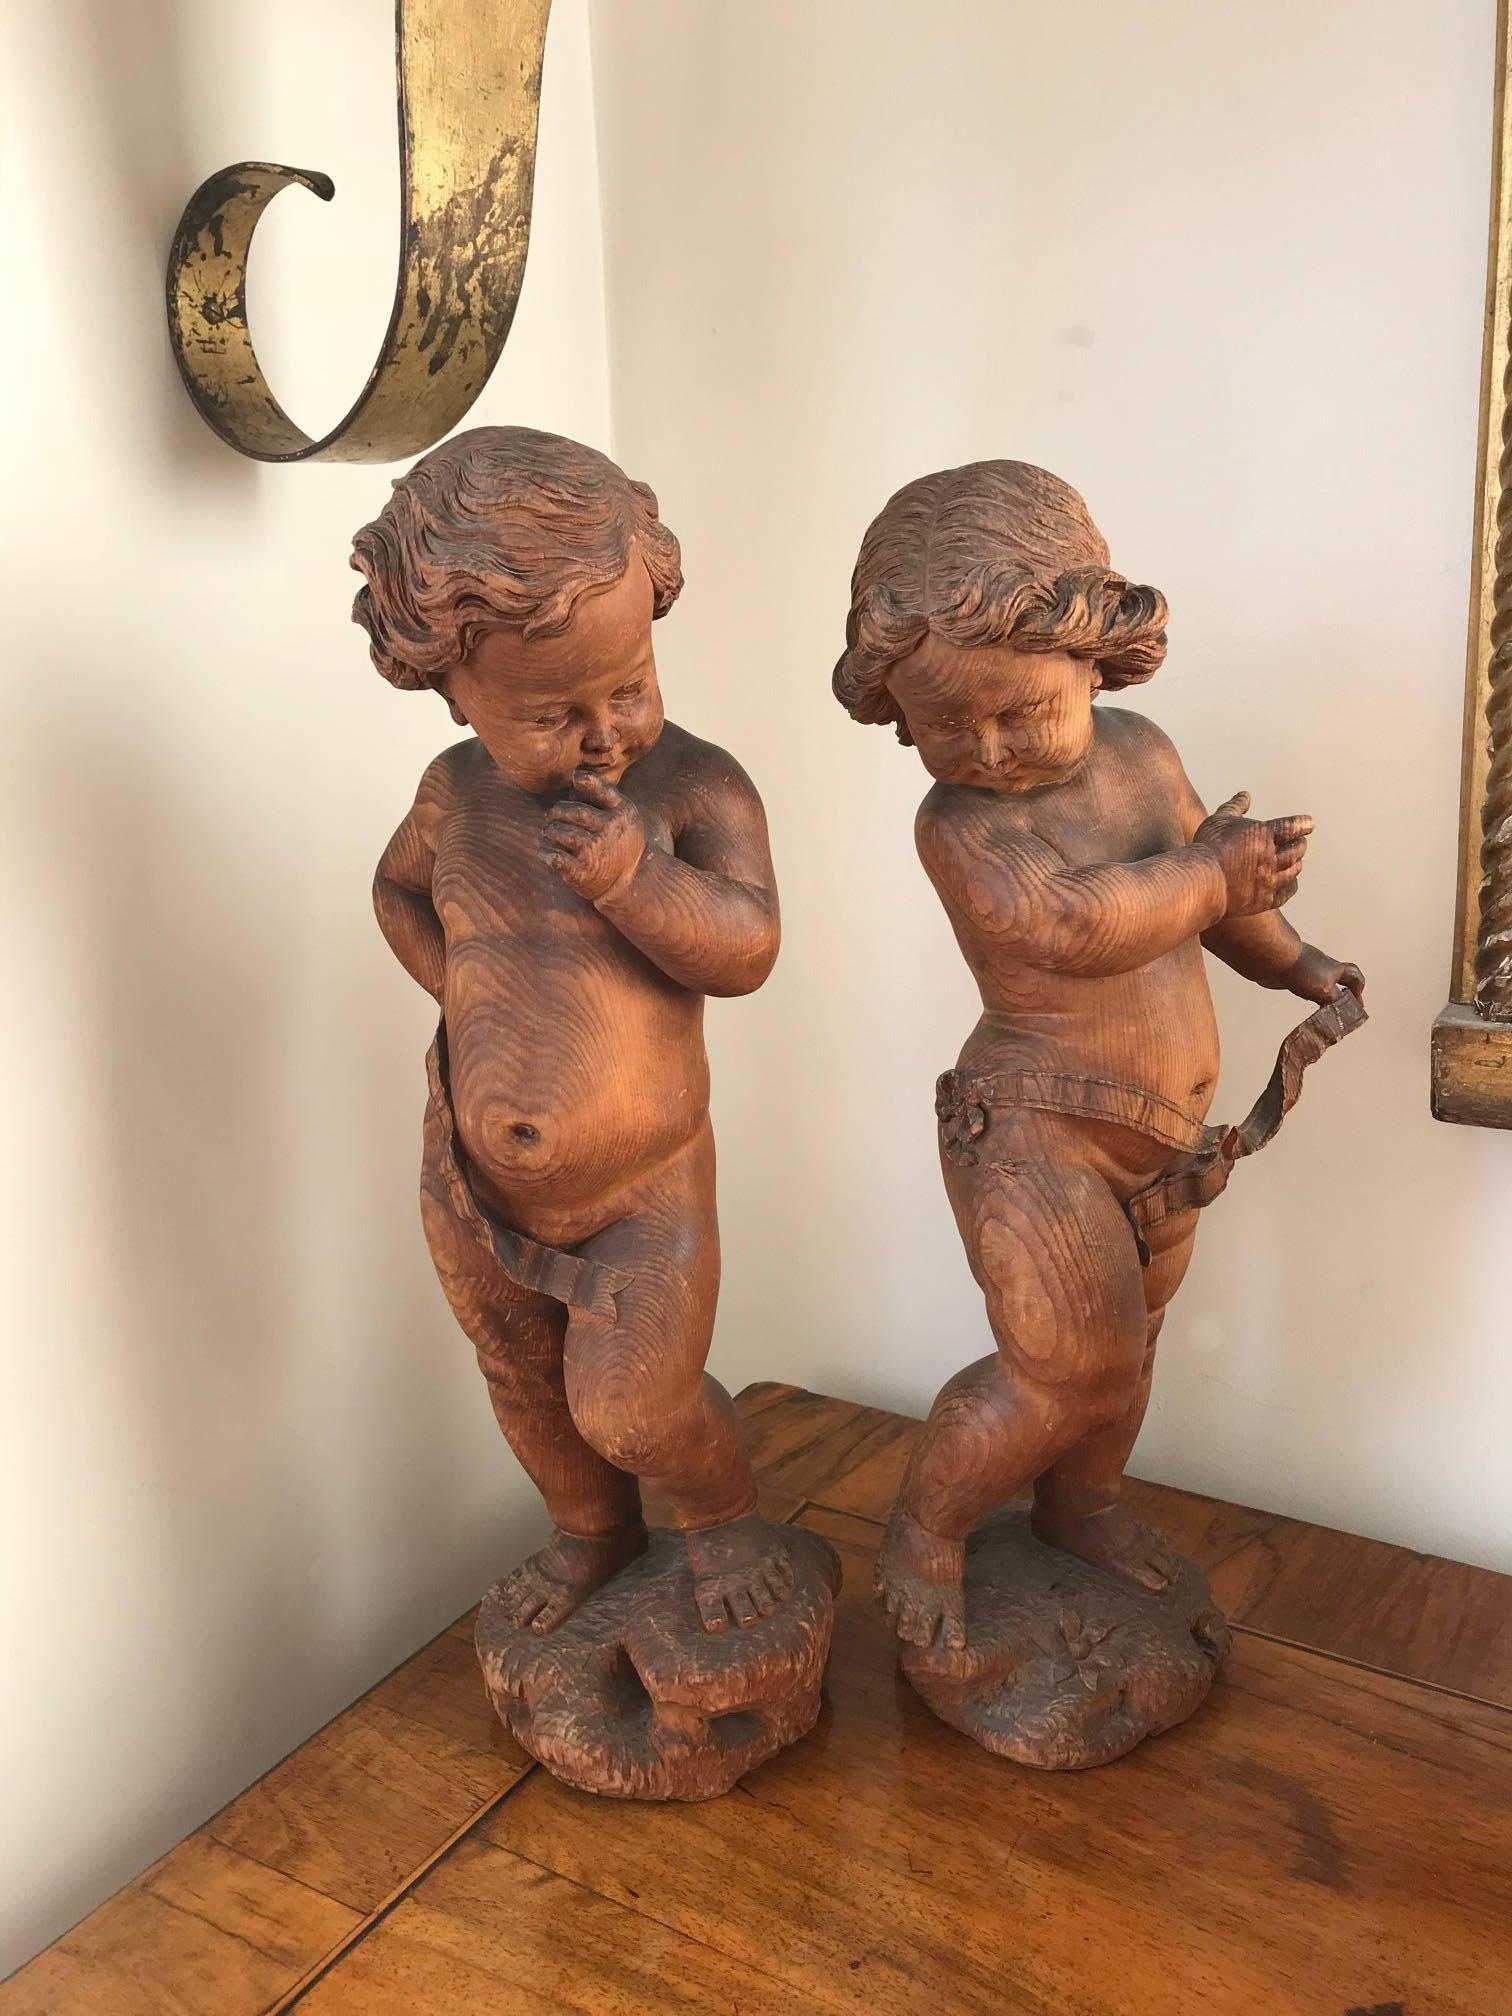 A wonderful pair of pitch pine woodend sculpures by the reknowned Venezian sculptor Valentino Besarel Panciera. Both of the sculptures are signed V Besarel Venezia and are beautifully carved into ths soft wood. There are some damage to the little